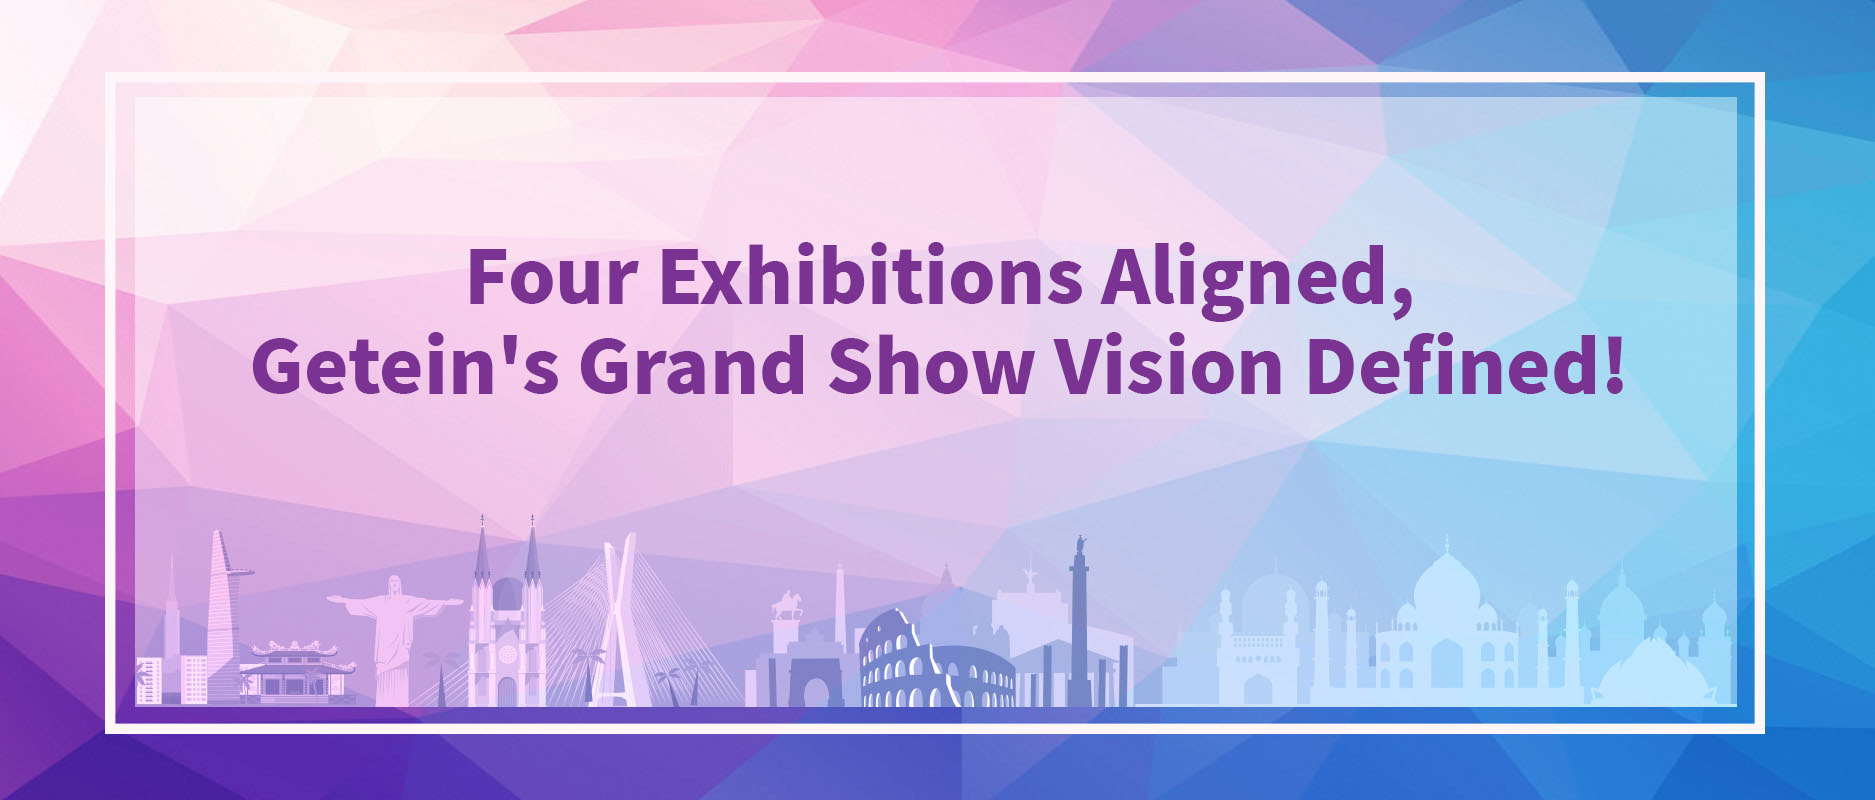 Four Exhibitions Aligned, Getein's Grand Show Vision Defined!